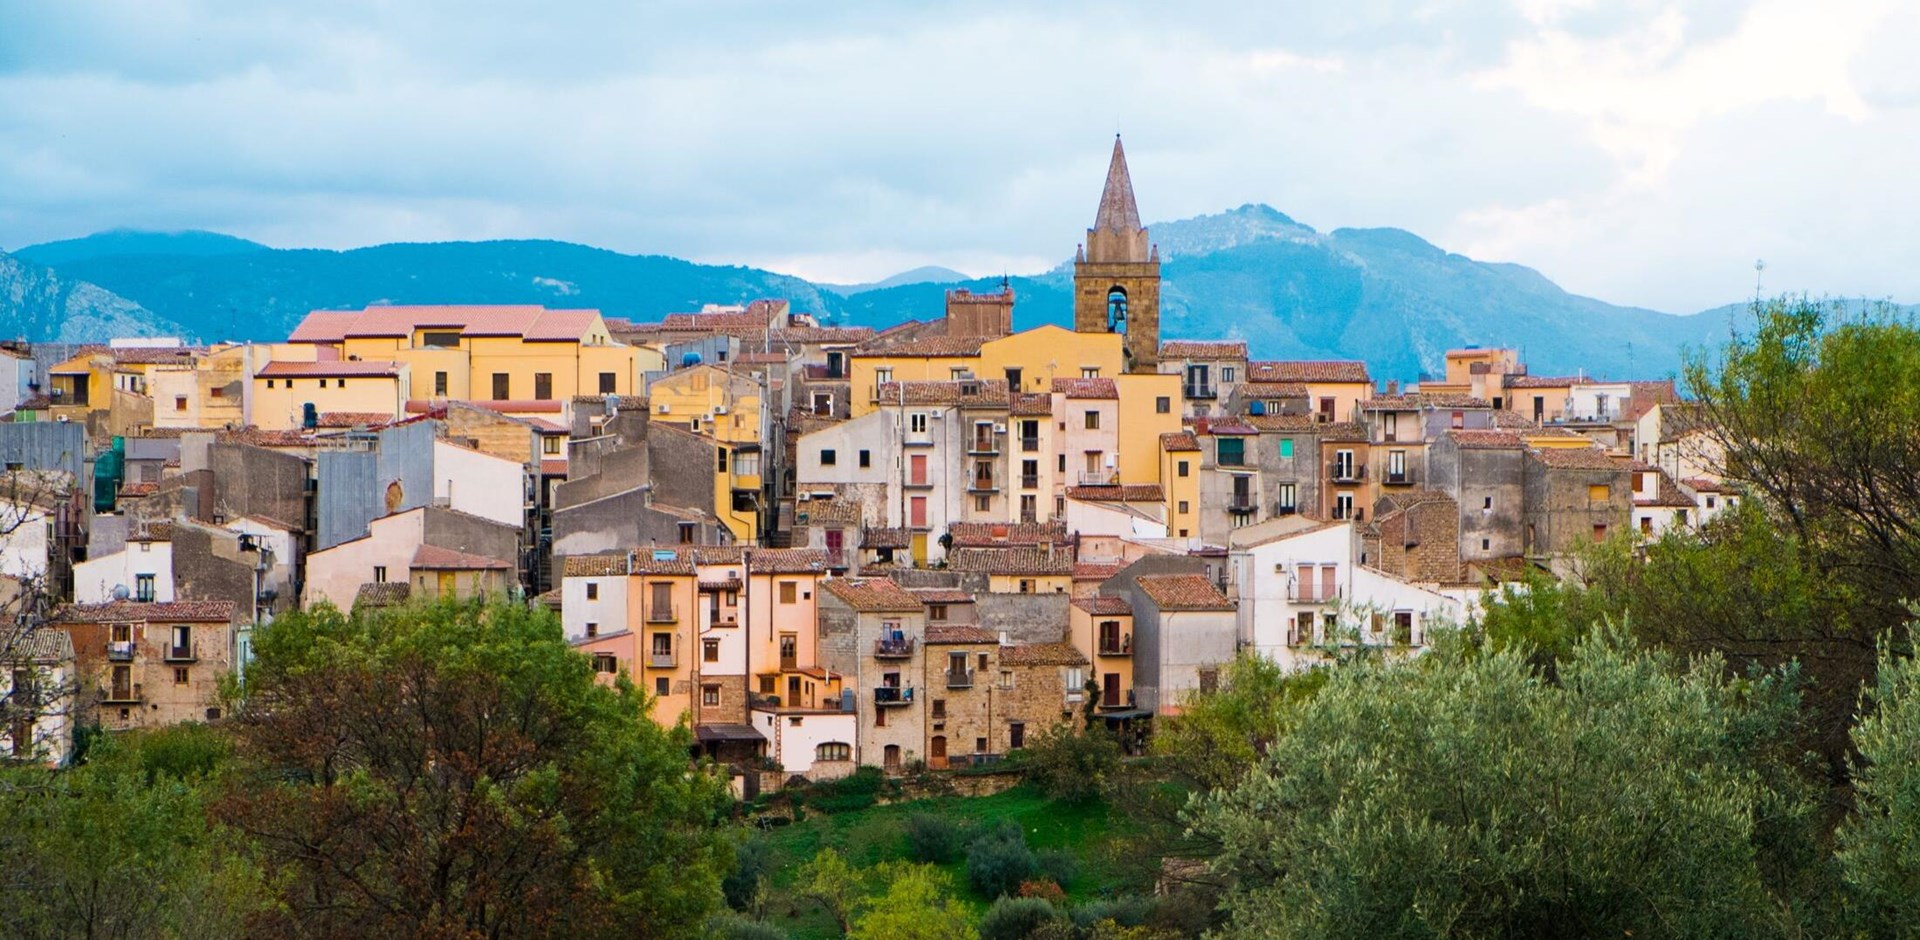 Town of Castelbuono on the Madonie mountains, Sicily, Italy